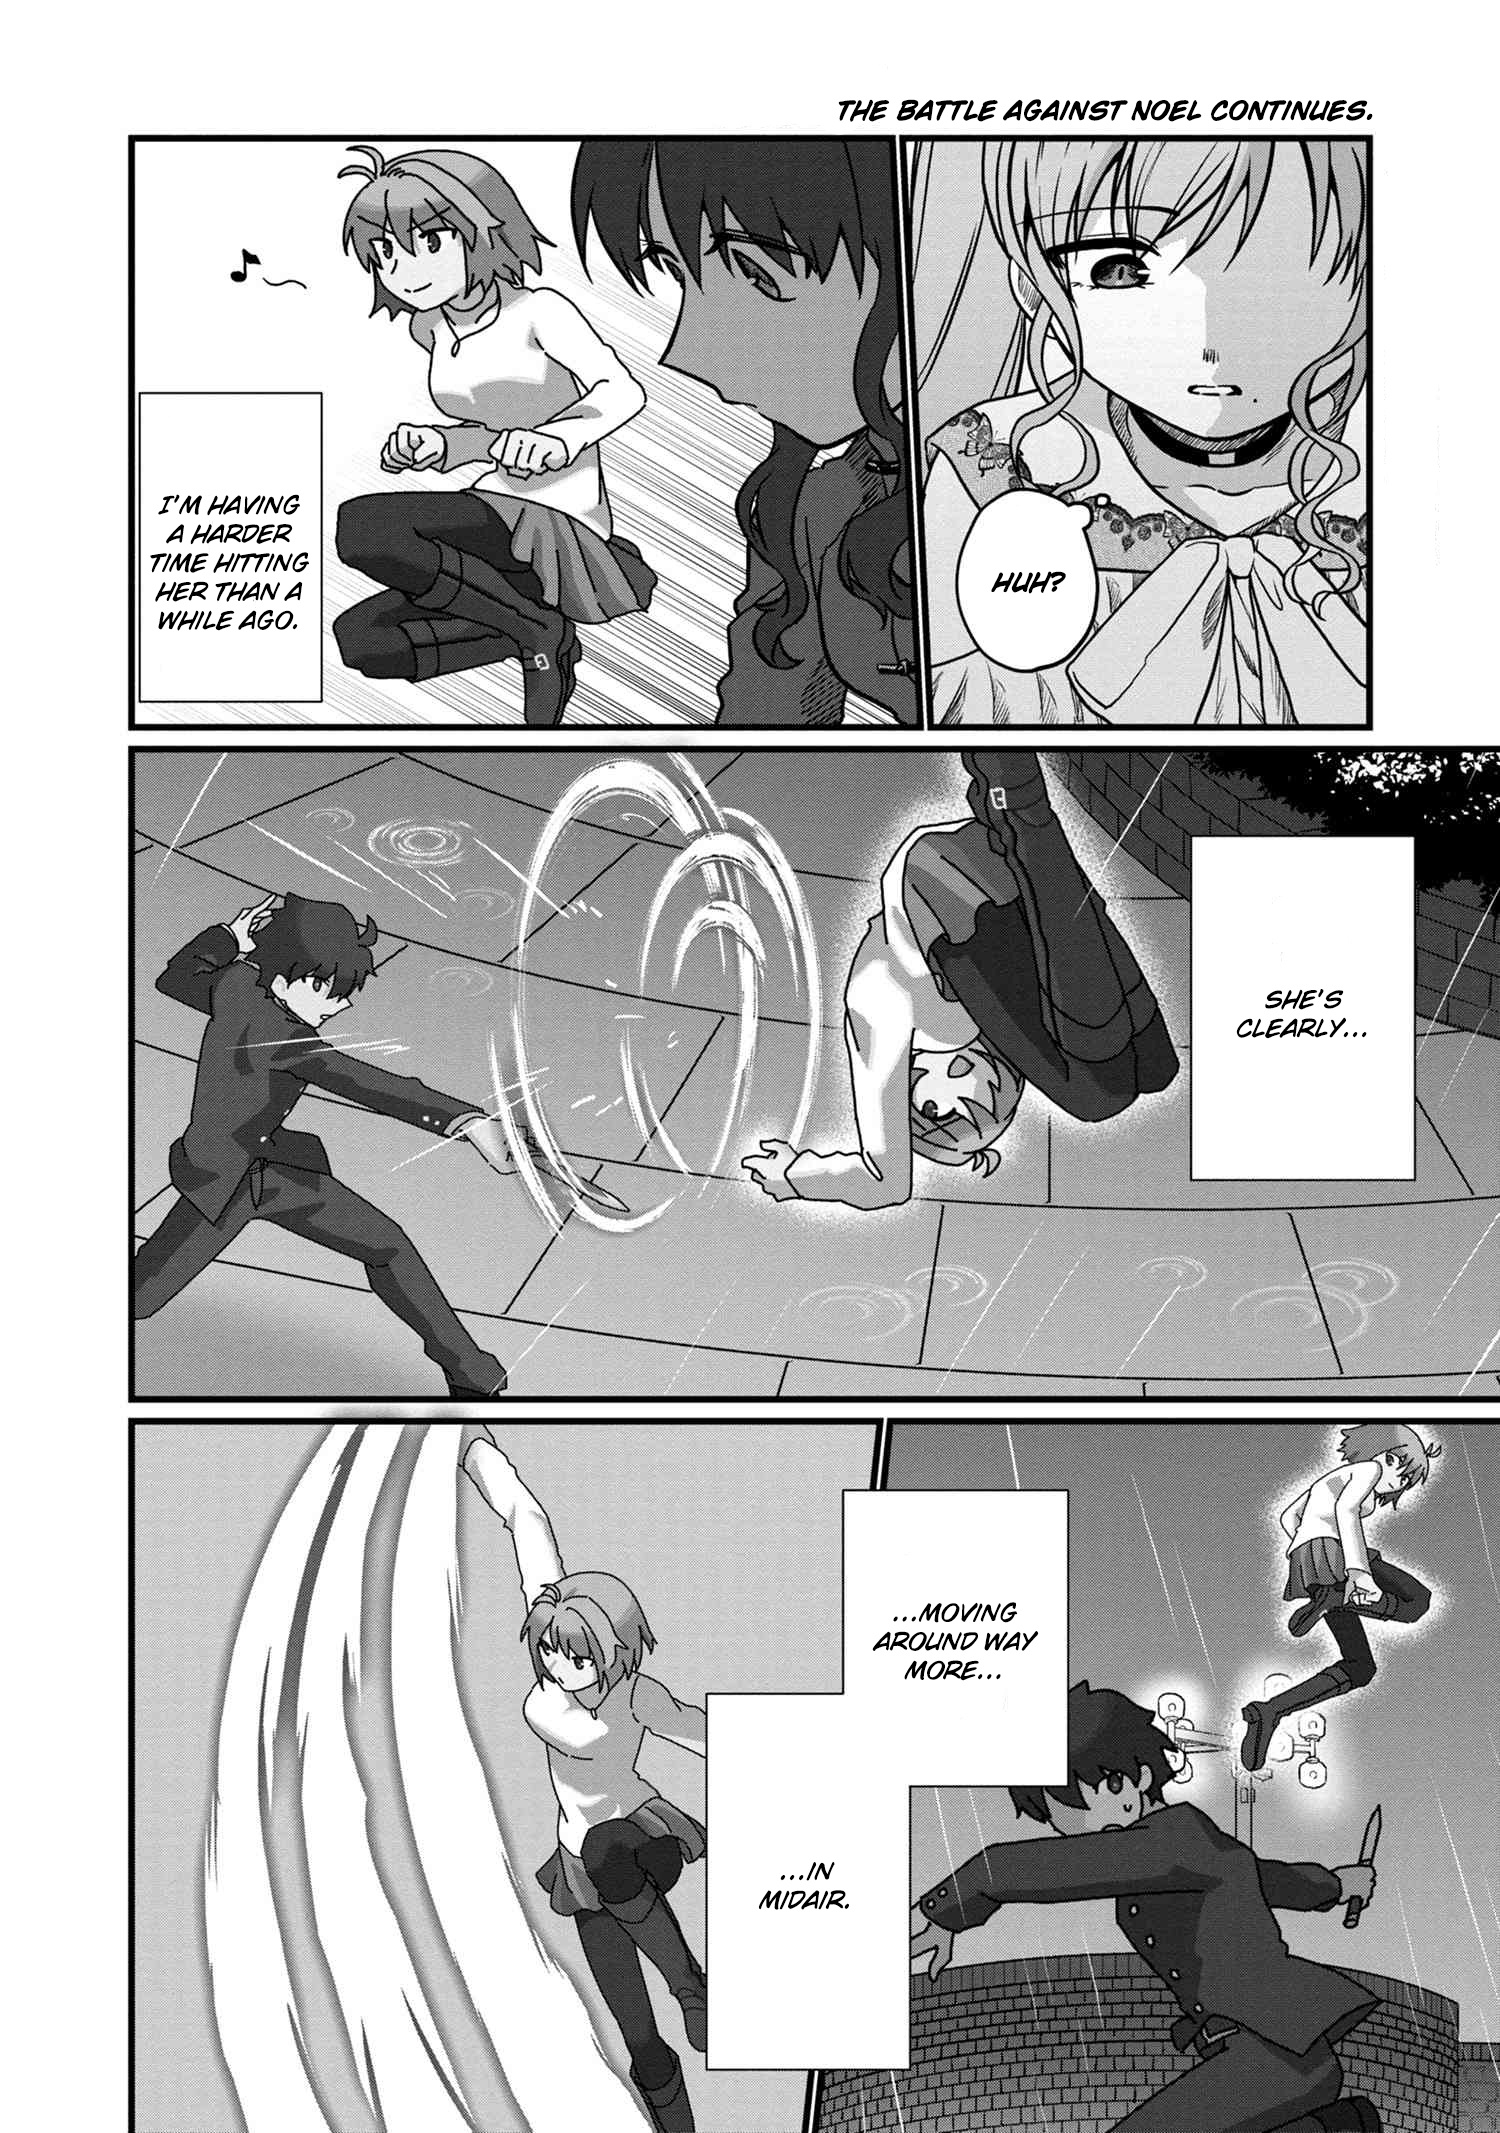 Melty Blood: Type Lumina Piece In Paradise - chapter 7.2 - #1